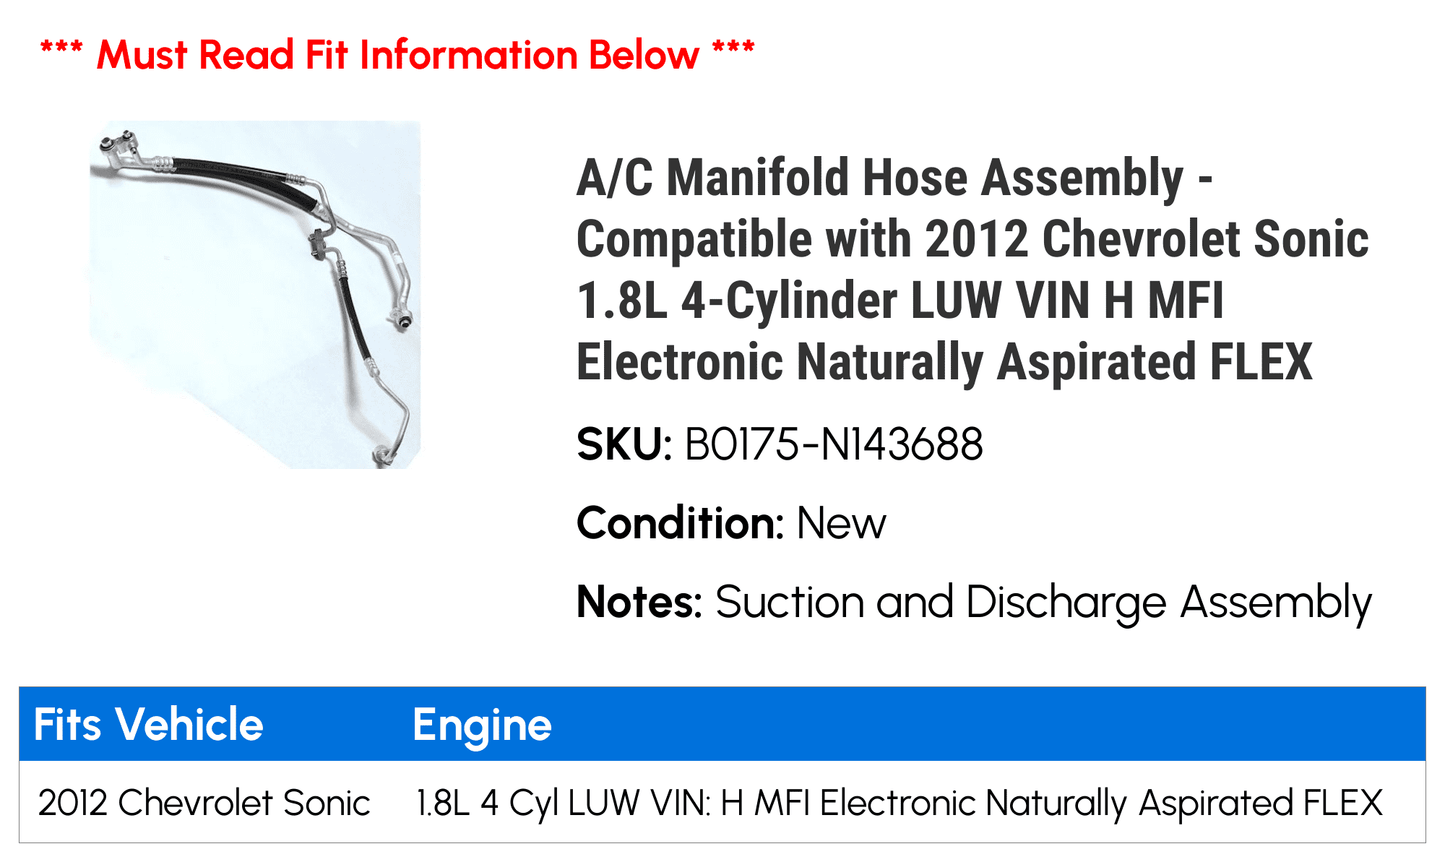 A/C Manifold Hose Assembly - Compatible with 2012 Chevy Sonic 1.8L 4-Cylinder LUW VIN H MFI Electronic Naturally Aspirated FLEX